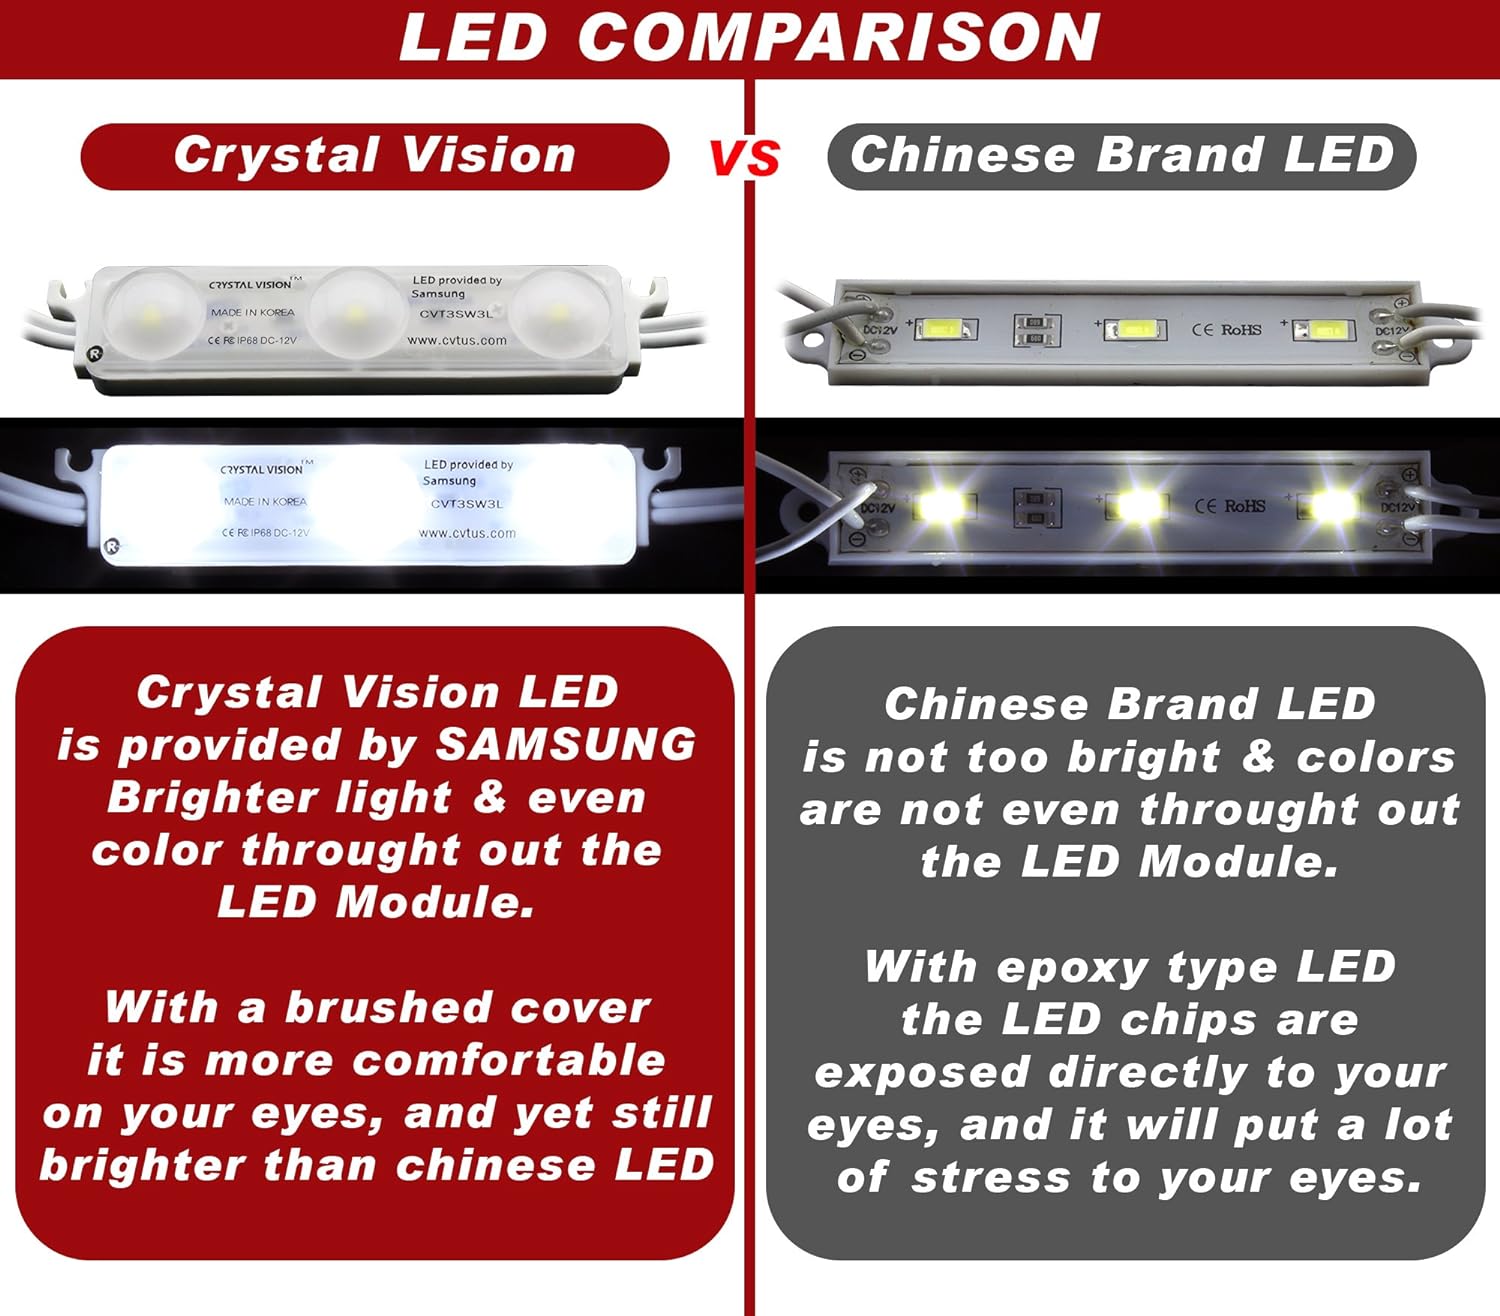 The image compares Crystal Vision's LED modules, powered by SAMSUNG, to a generic Chinese brand. Crystal Vision's LEDs are praised for their bright, even light and eye-comforting brushed cover, while the Chinese brand is critiqued for its dimmer light, uneven color, and exposed LEDs that are harsh on the eyes.